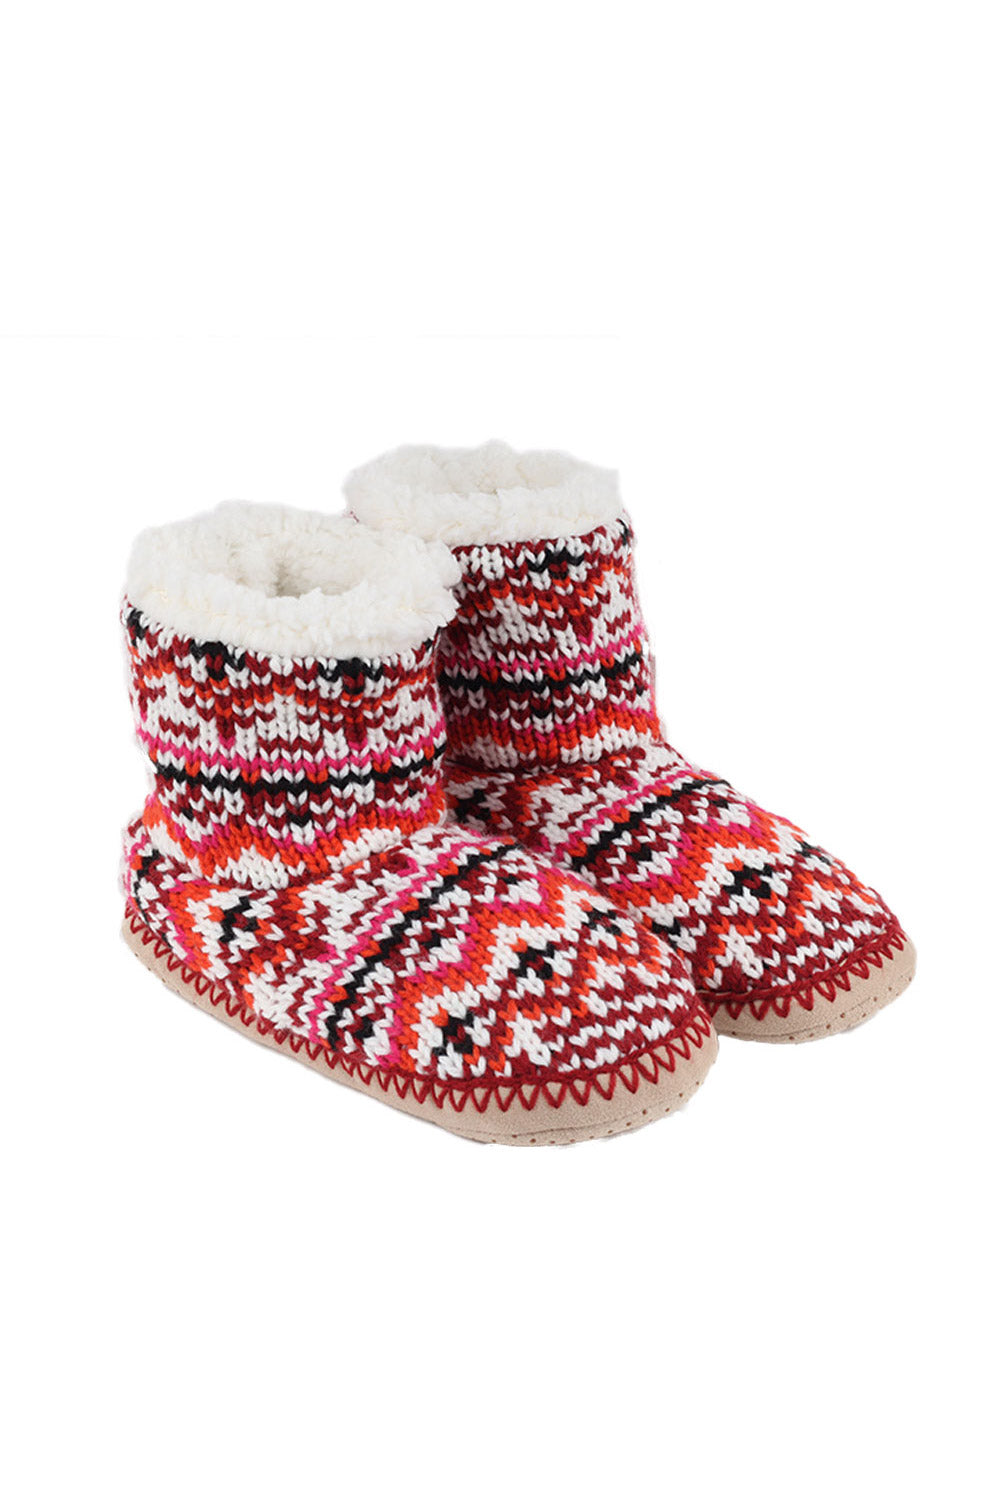 Knitted home booties with soft, fuzzy lining and non-slip sole. Machine washable and dryer safe.